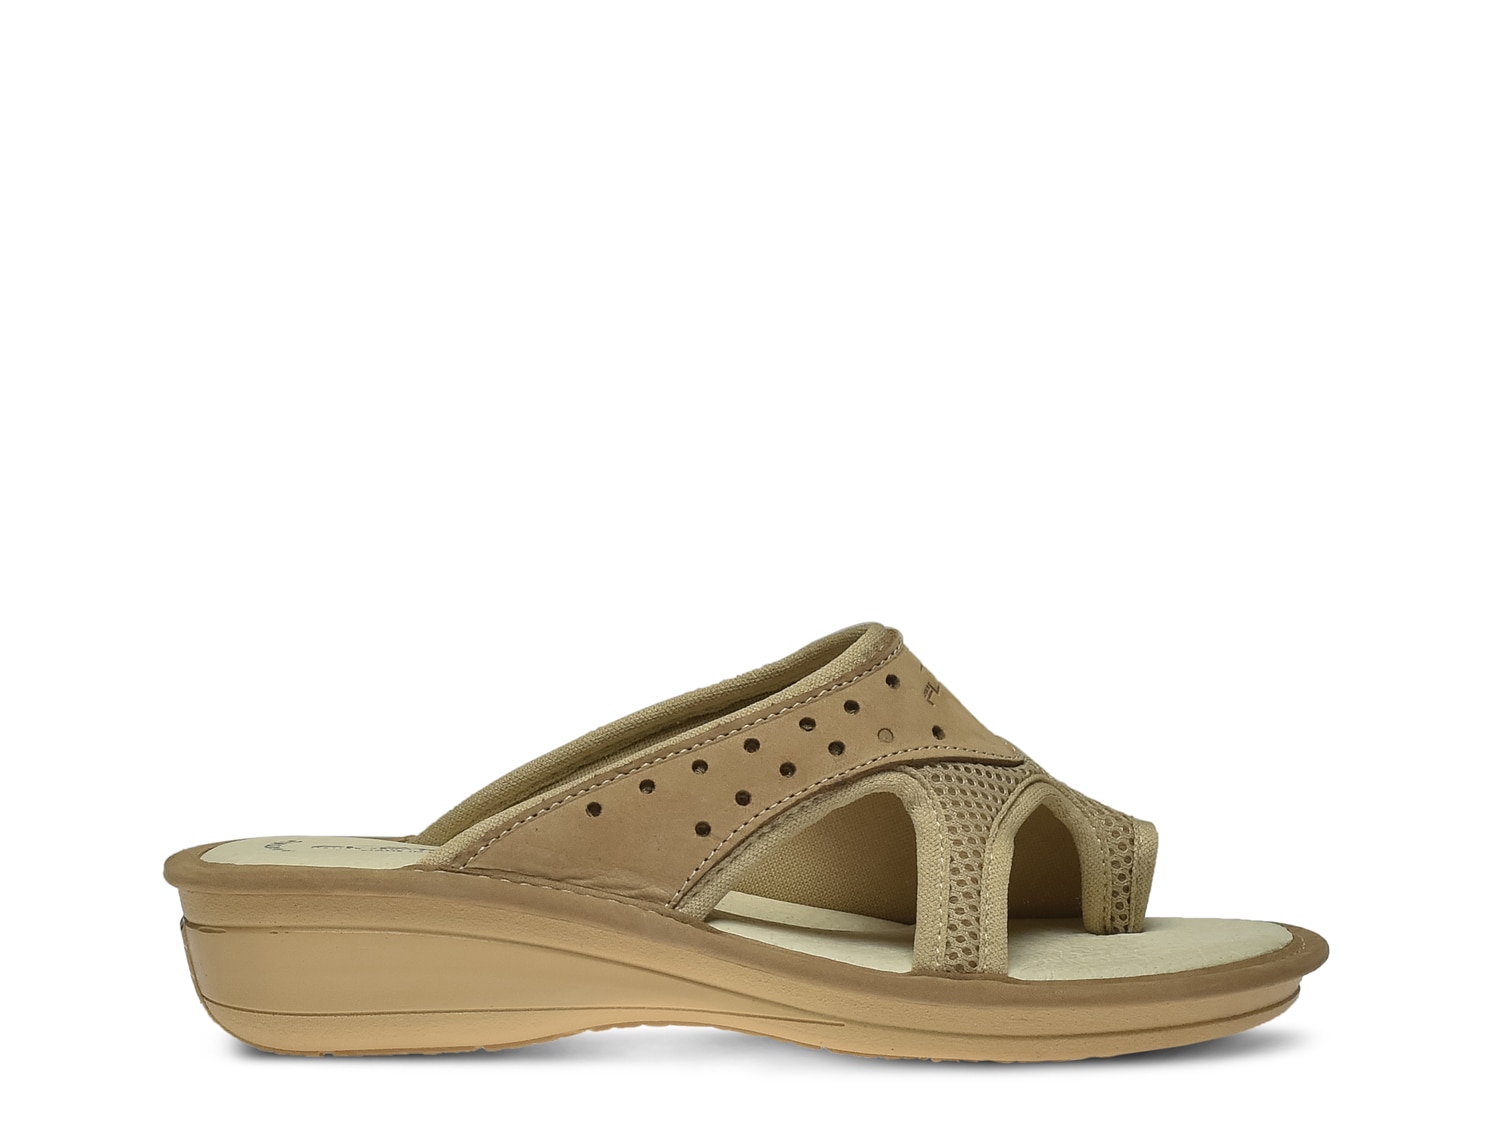 Flexus by Spring Step Pascalle Wedge Sandal Women's Shoes | DSW